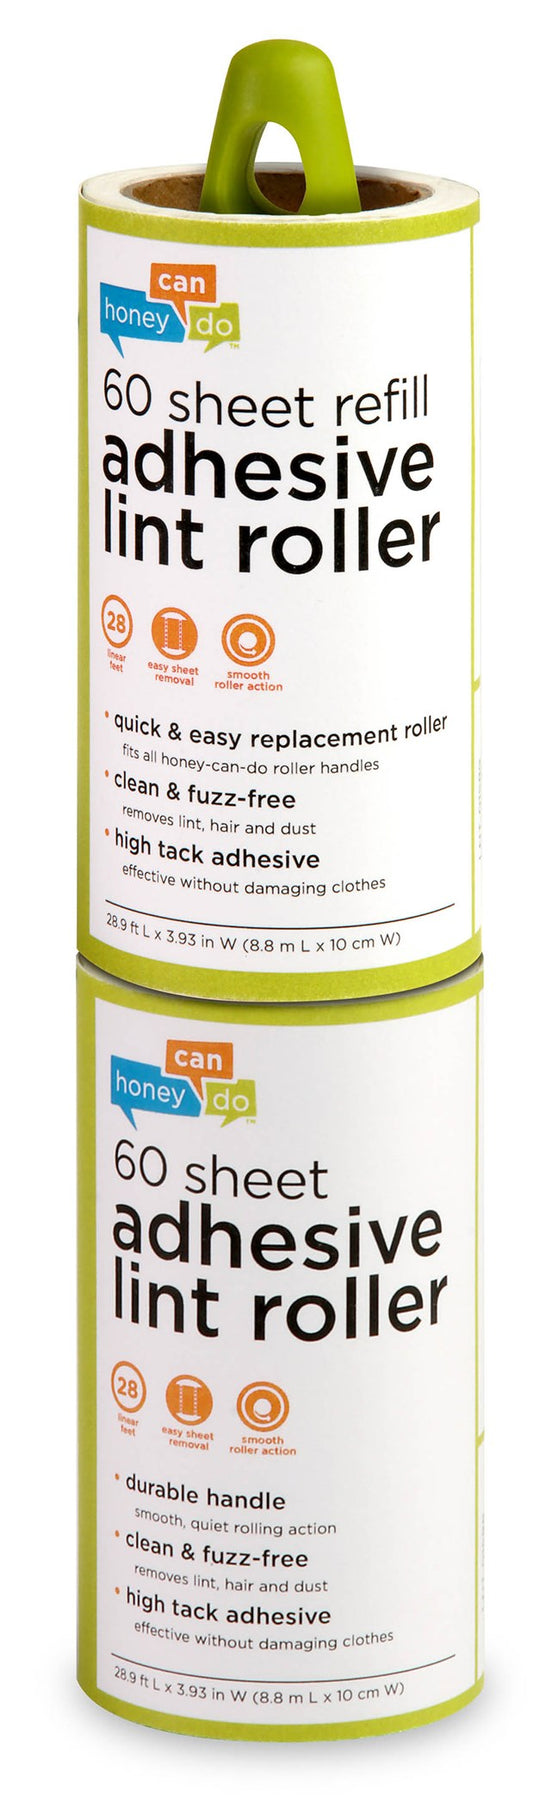 Honey Can Do LNT-03769 Lint Roller With 2 60-Sheet Adhesive Rolls